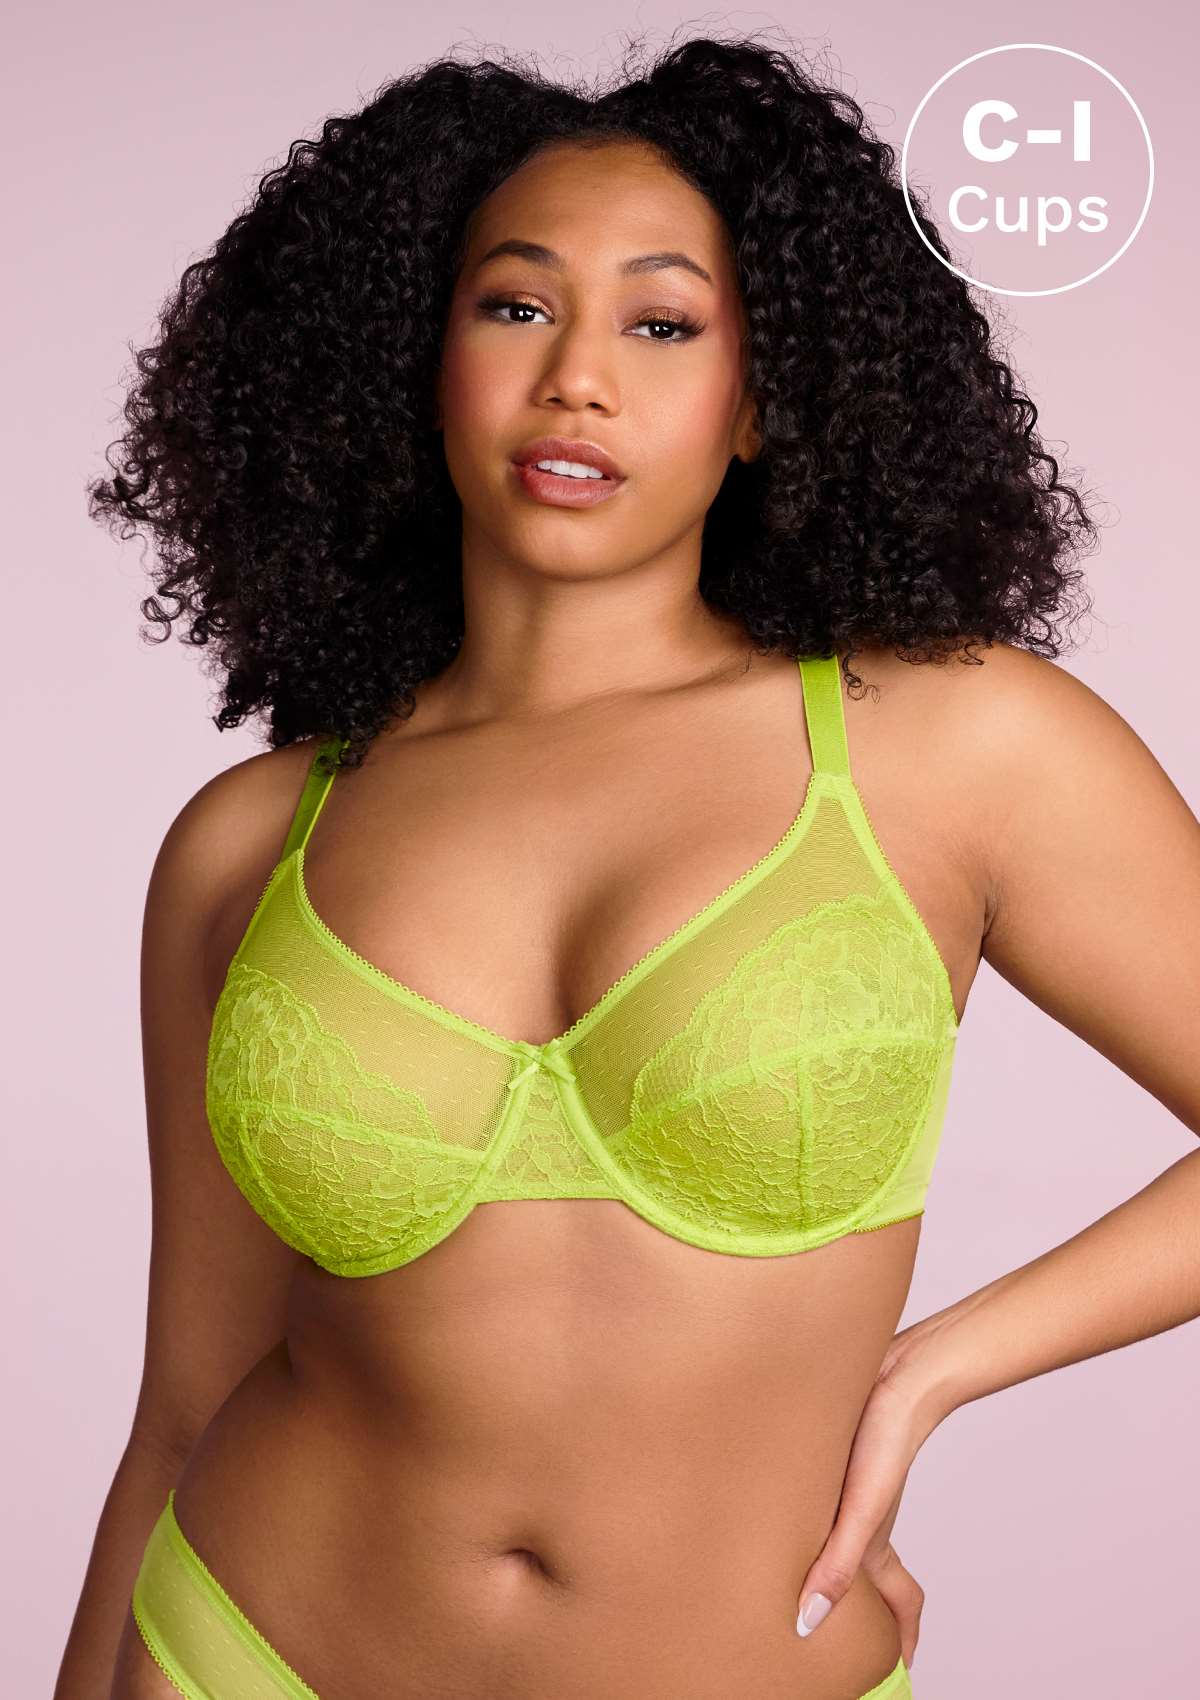 HSIA Enchante Full Cup Minimizing Bra: Supportive Unlined Lace Bra - Lime Green / 40 / C